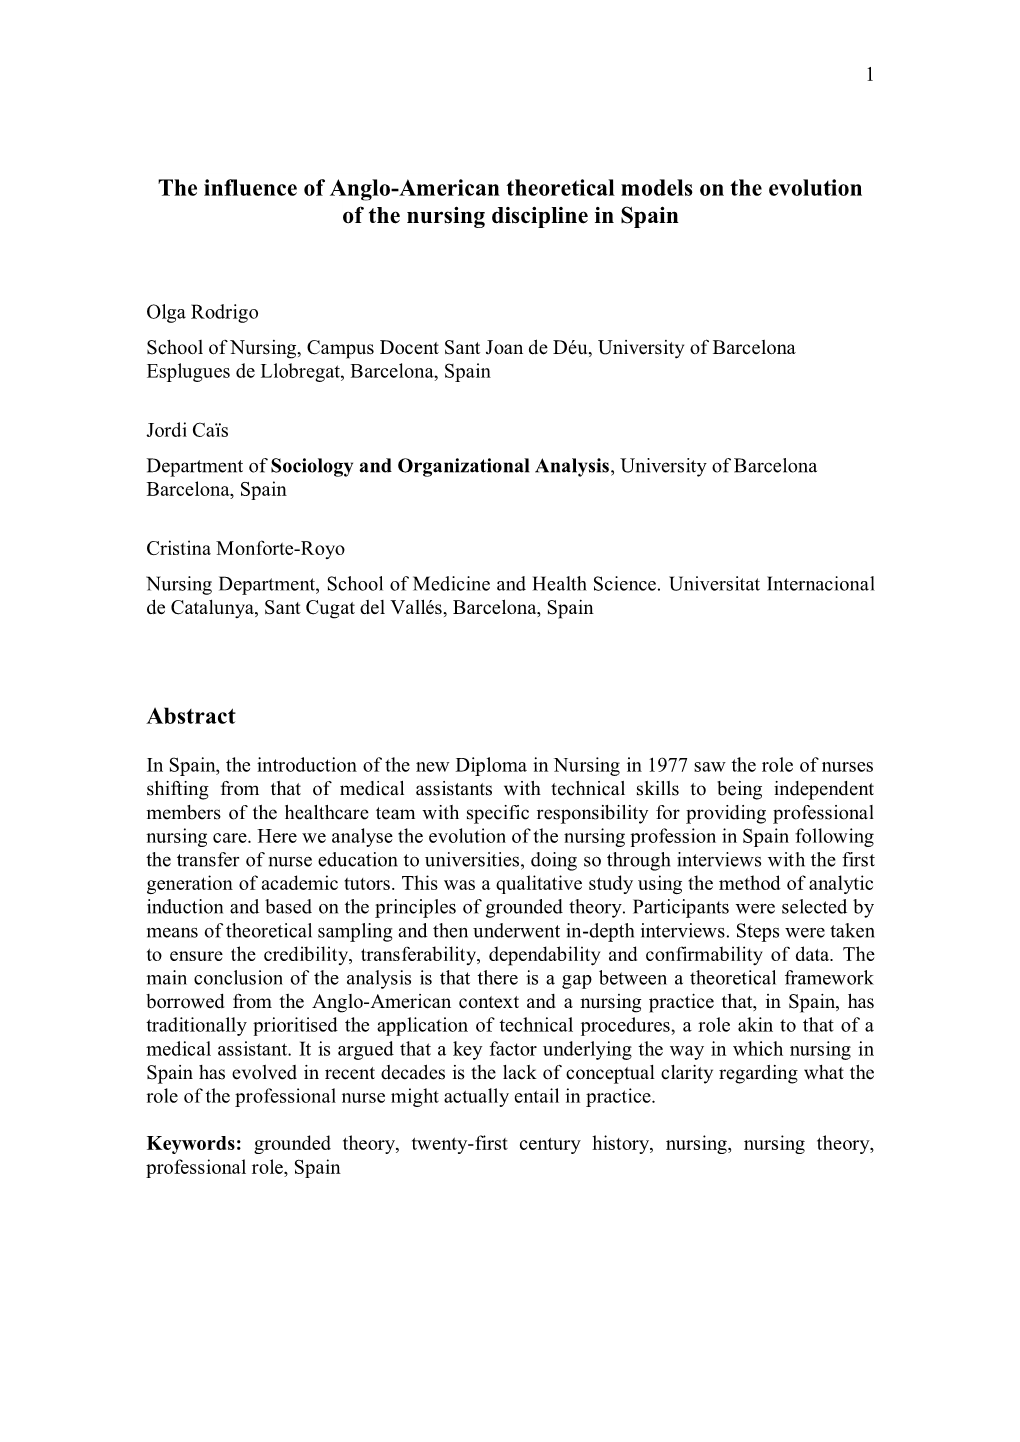 The Influence of Anglo-American Theoretical Models on the Evolution of the Nursing Discipline in Spain